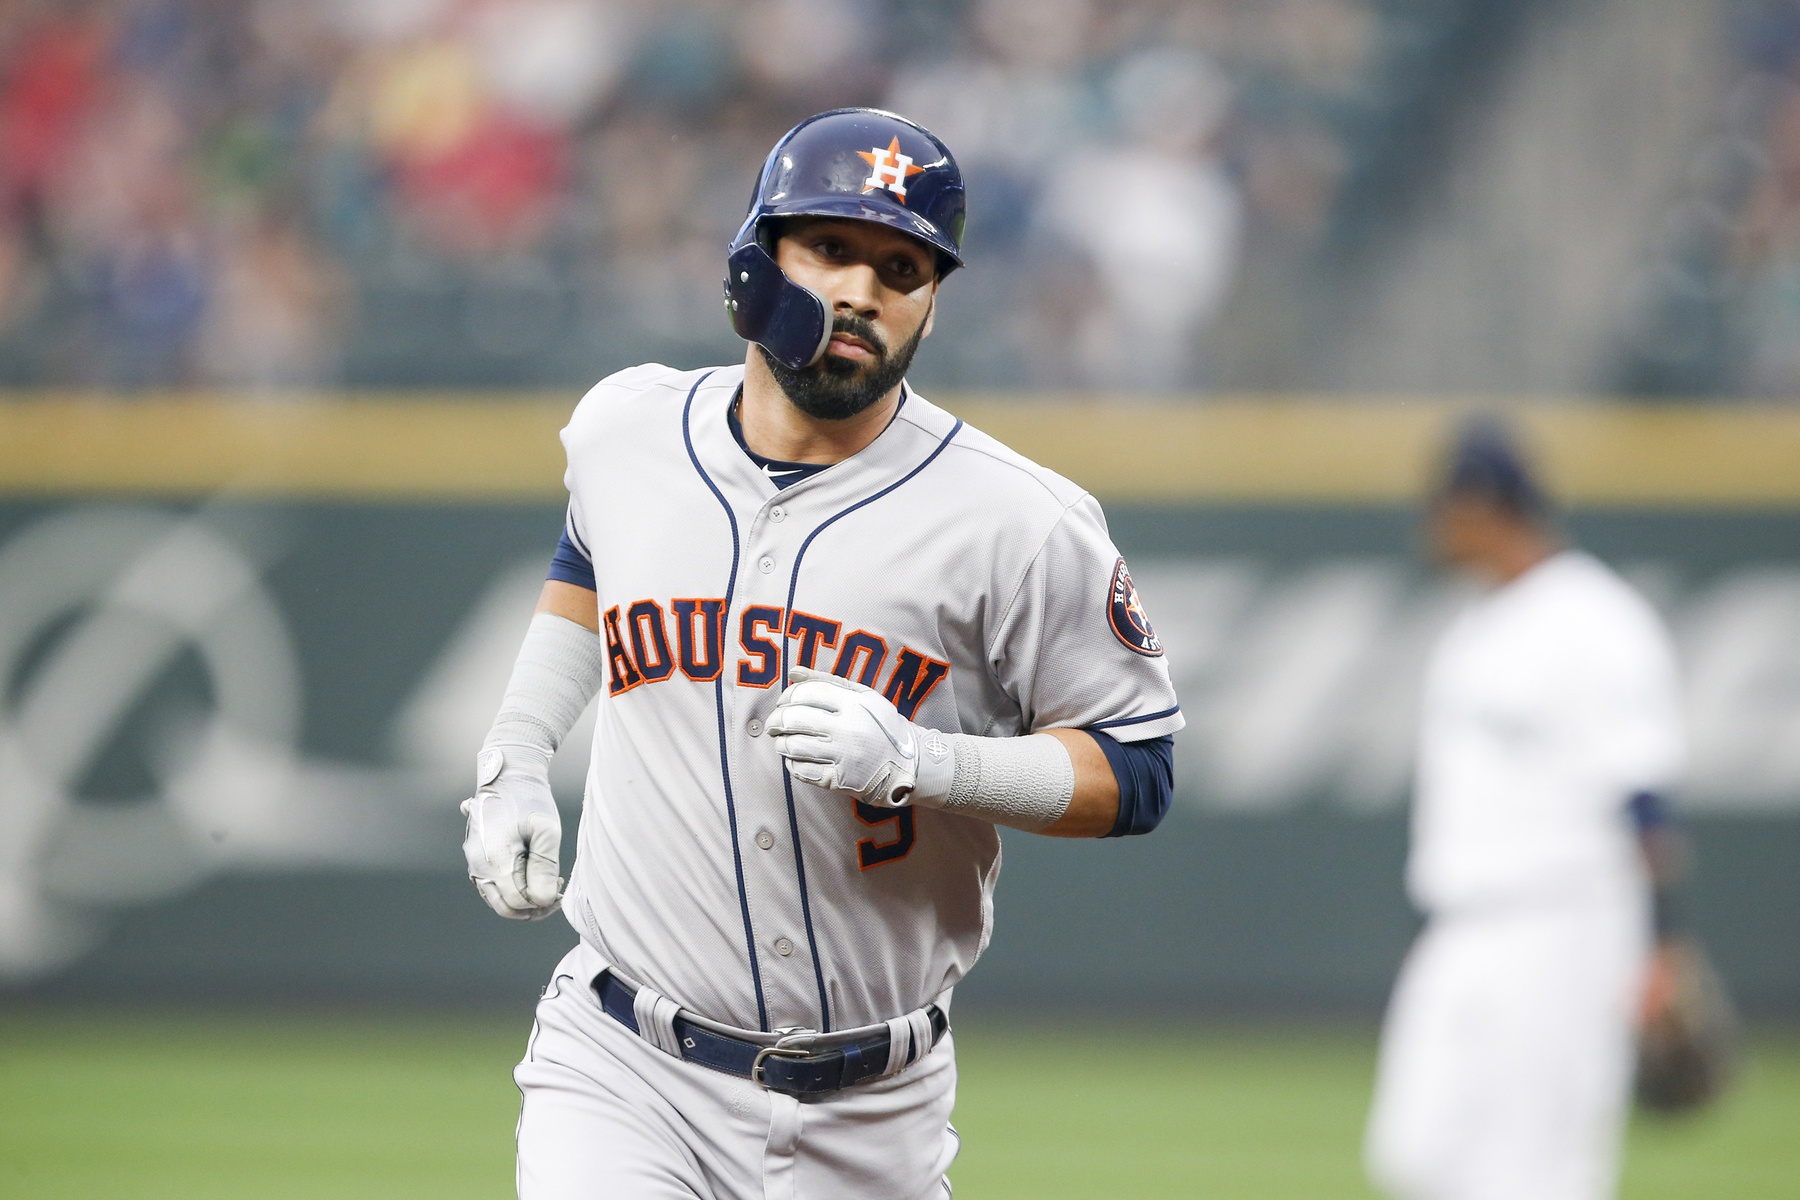 MLB Twitter reacts to Marwin Gonzalez signing with Japan's Orix Buffaloes:  “It's time to retire”, Red Sox got outbid again”